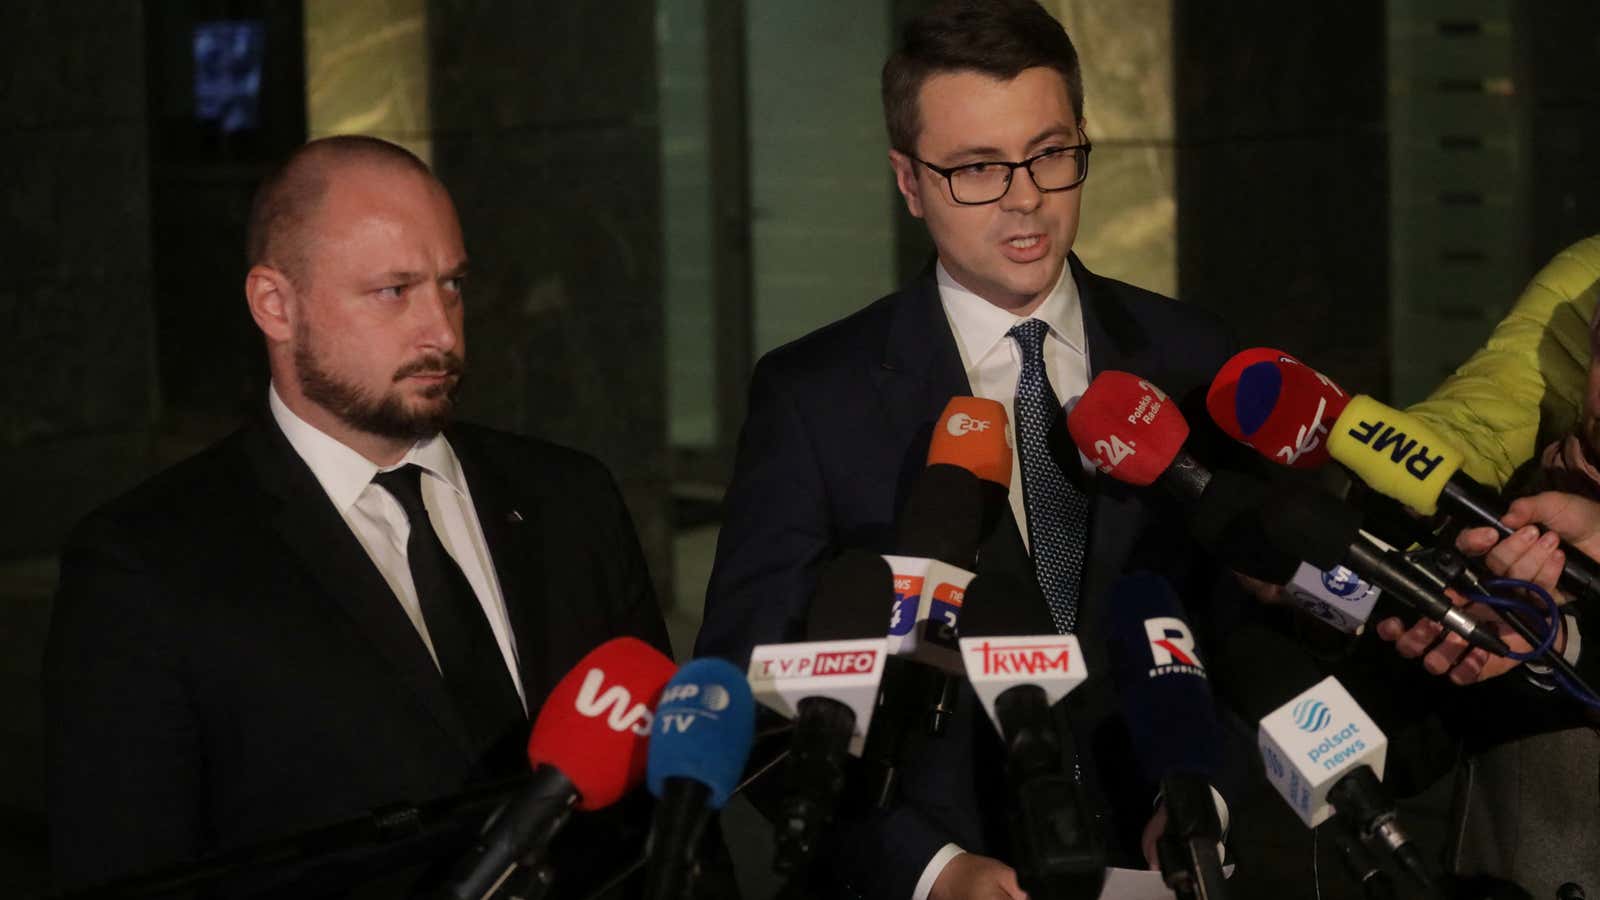 Polish government spokesman Piotr Muller speaks to media after a meeting of the security committee in connection with blasts on Polish territory, in Warsaw, Poland, November 15, 2022.